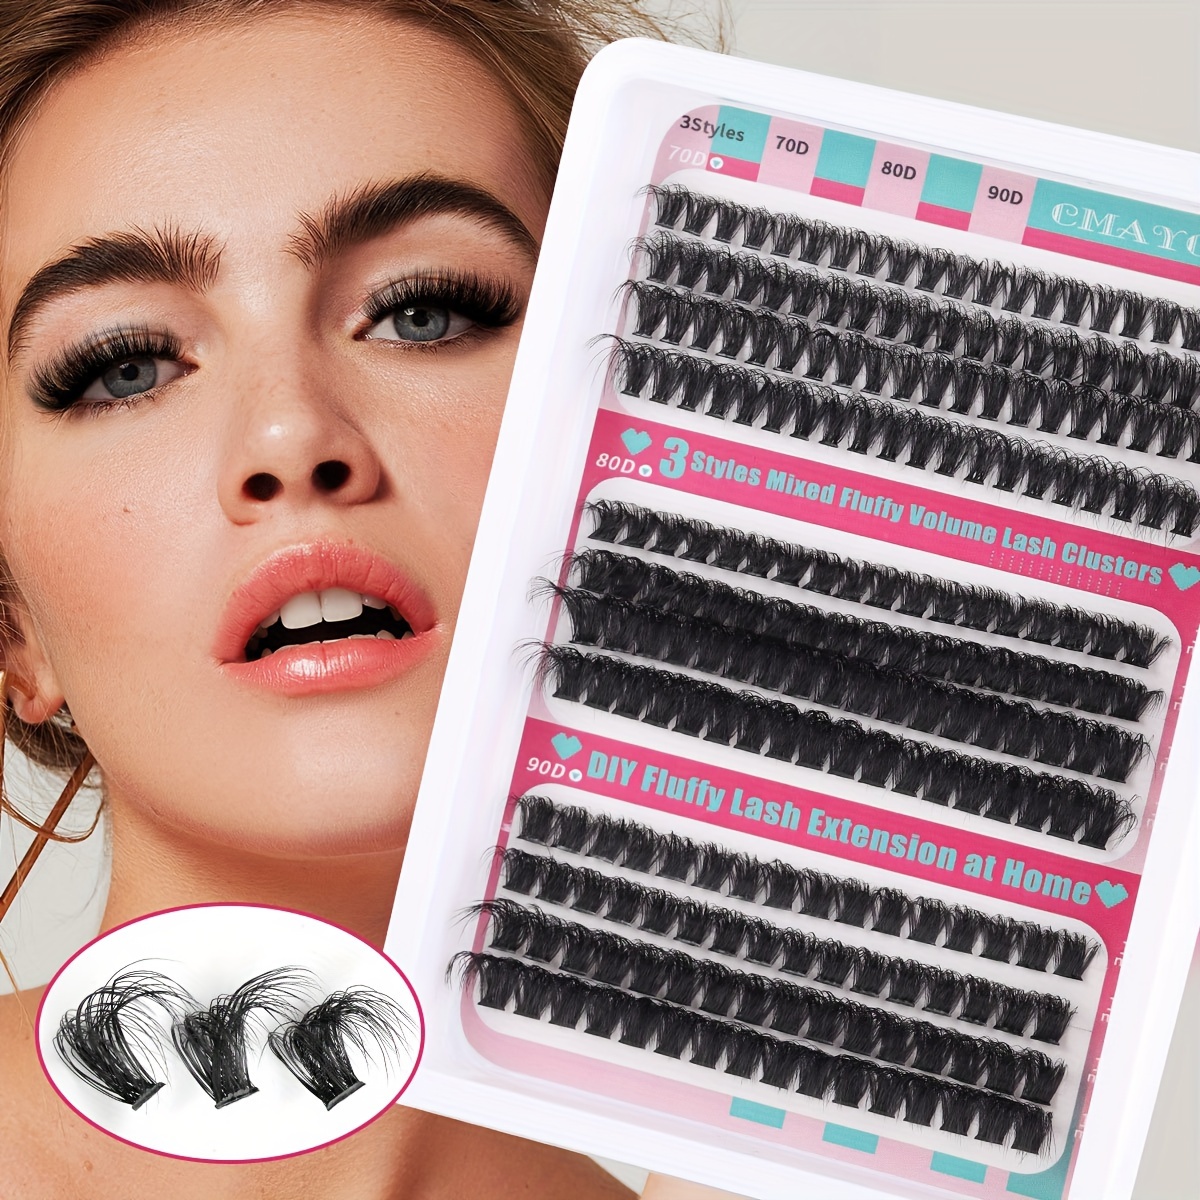 

216 Clusters Natural Look Eyelashes 12-18mm, Diy Fluffy Volume Lash Extension Clusters, 70d/80d/90d Mixed Density, Perfect For Dates, Gift For Ladies And Girls